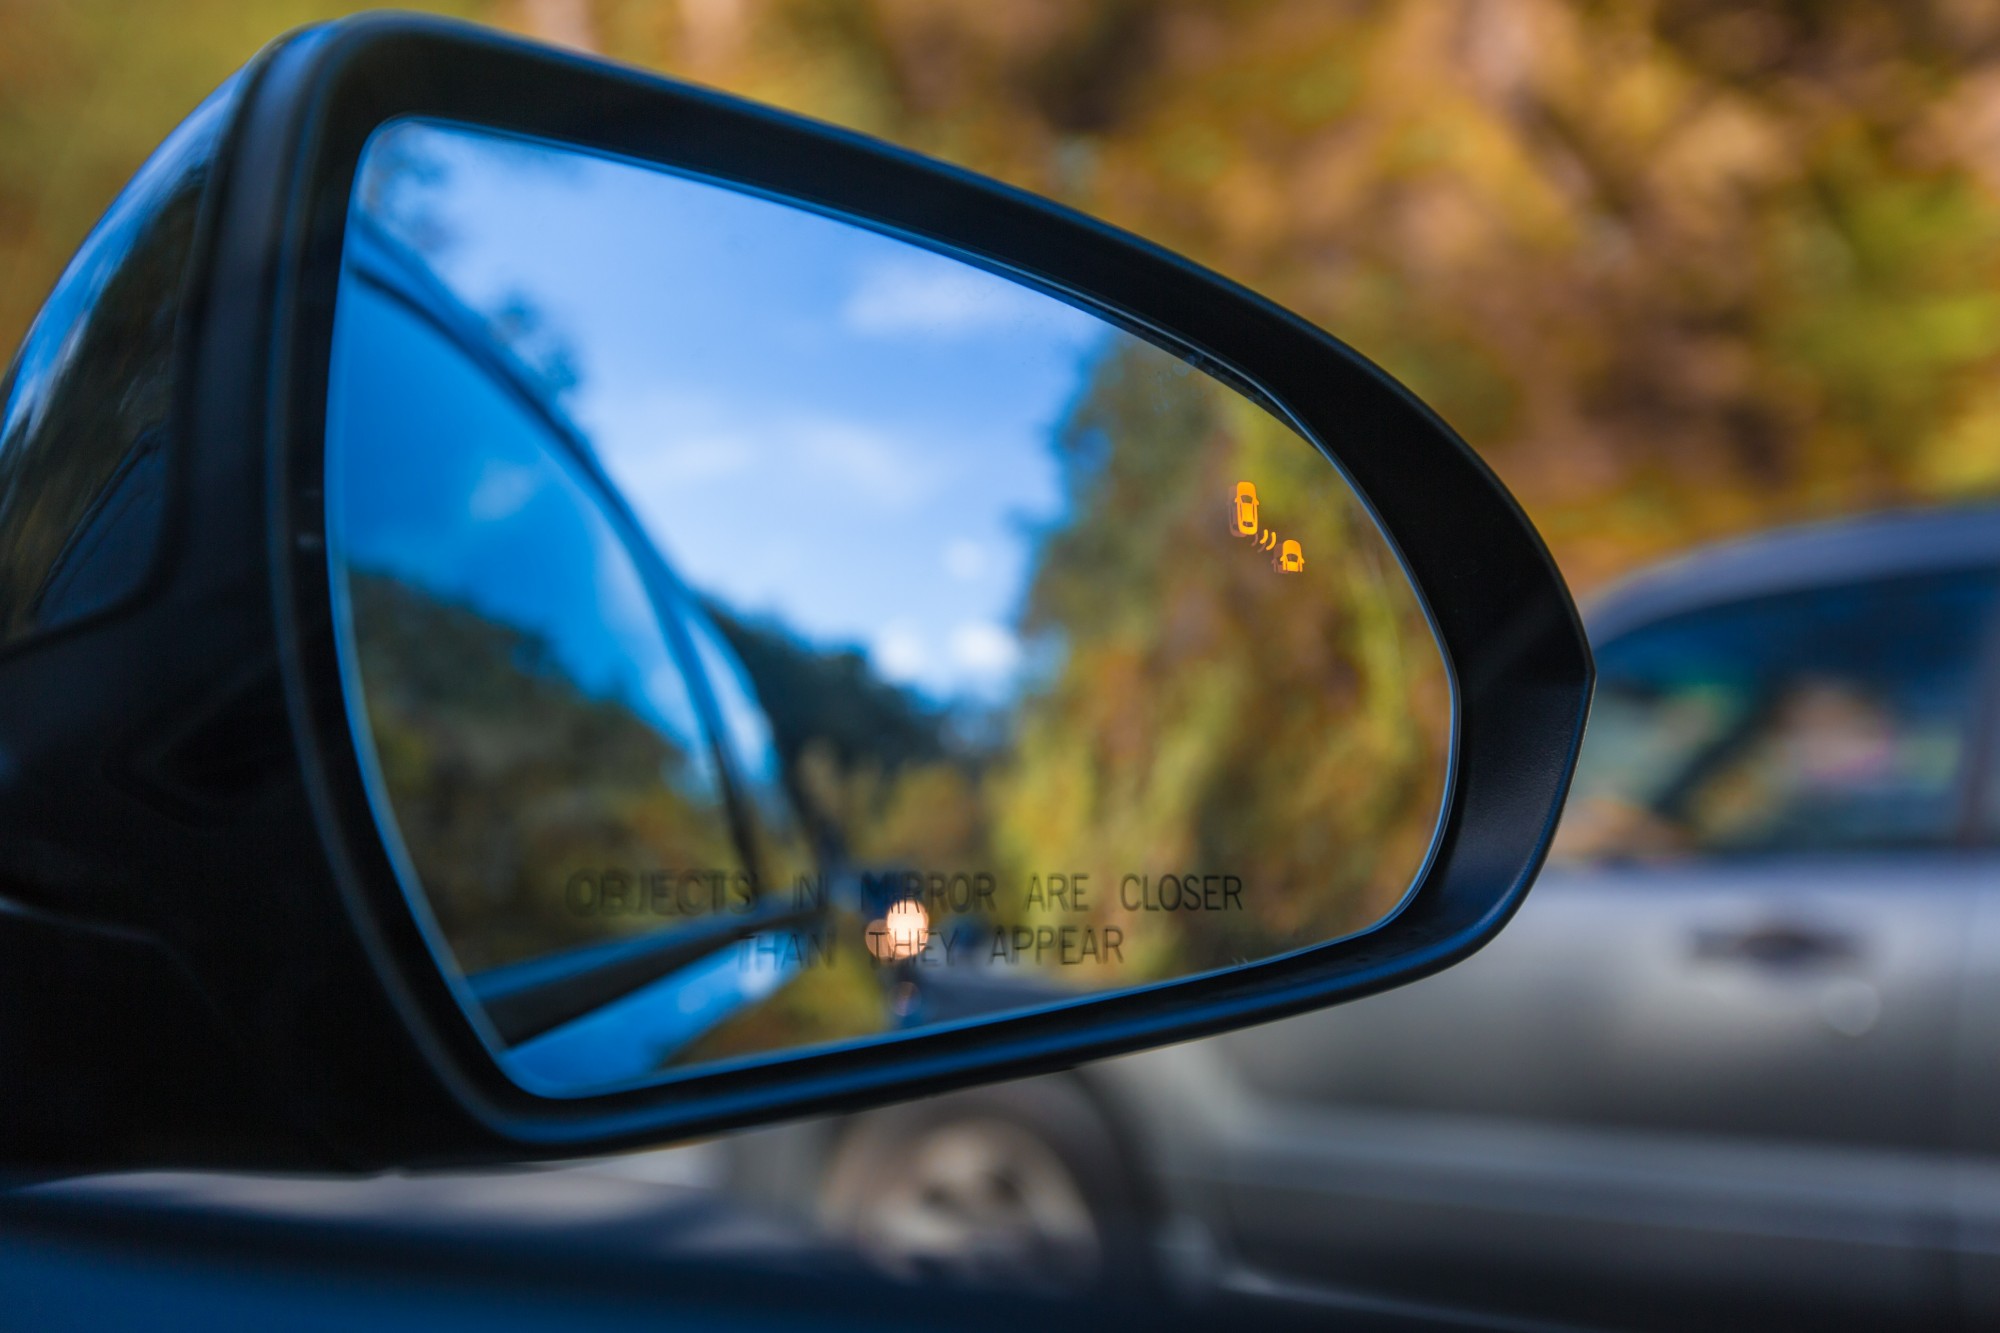 Objects in mirror are closer than they appear on car with Blind Spot Assist Warning LED Sensor Light